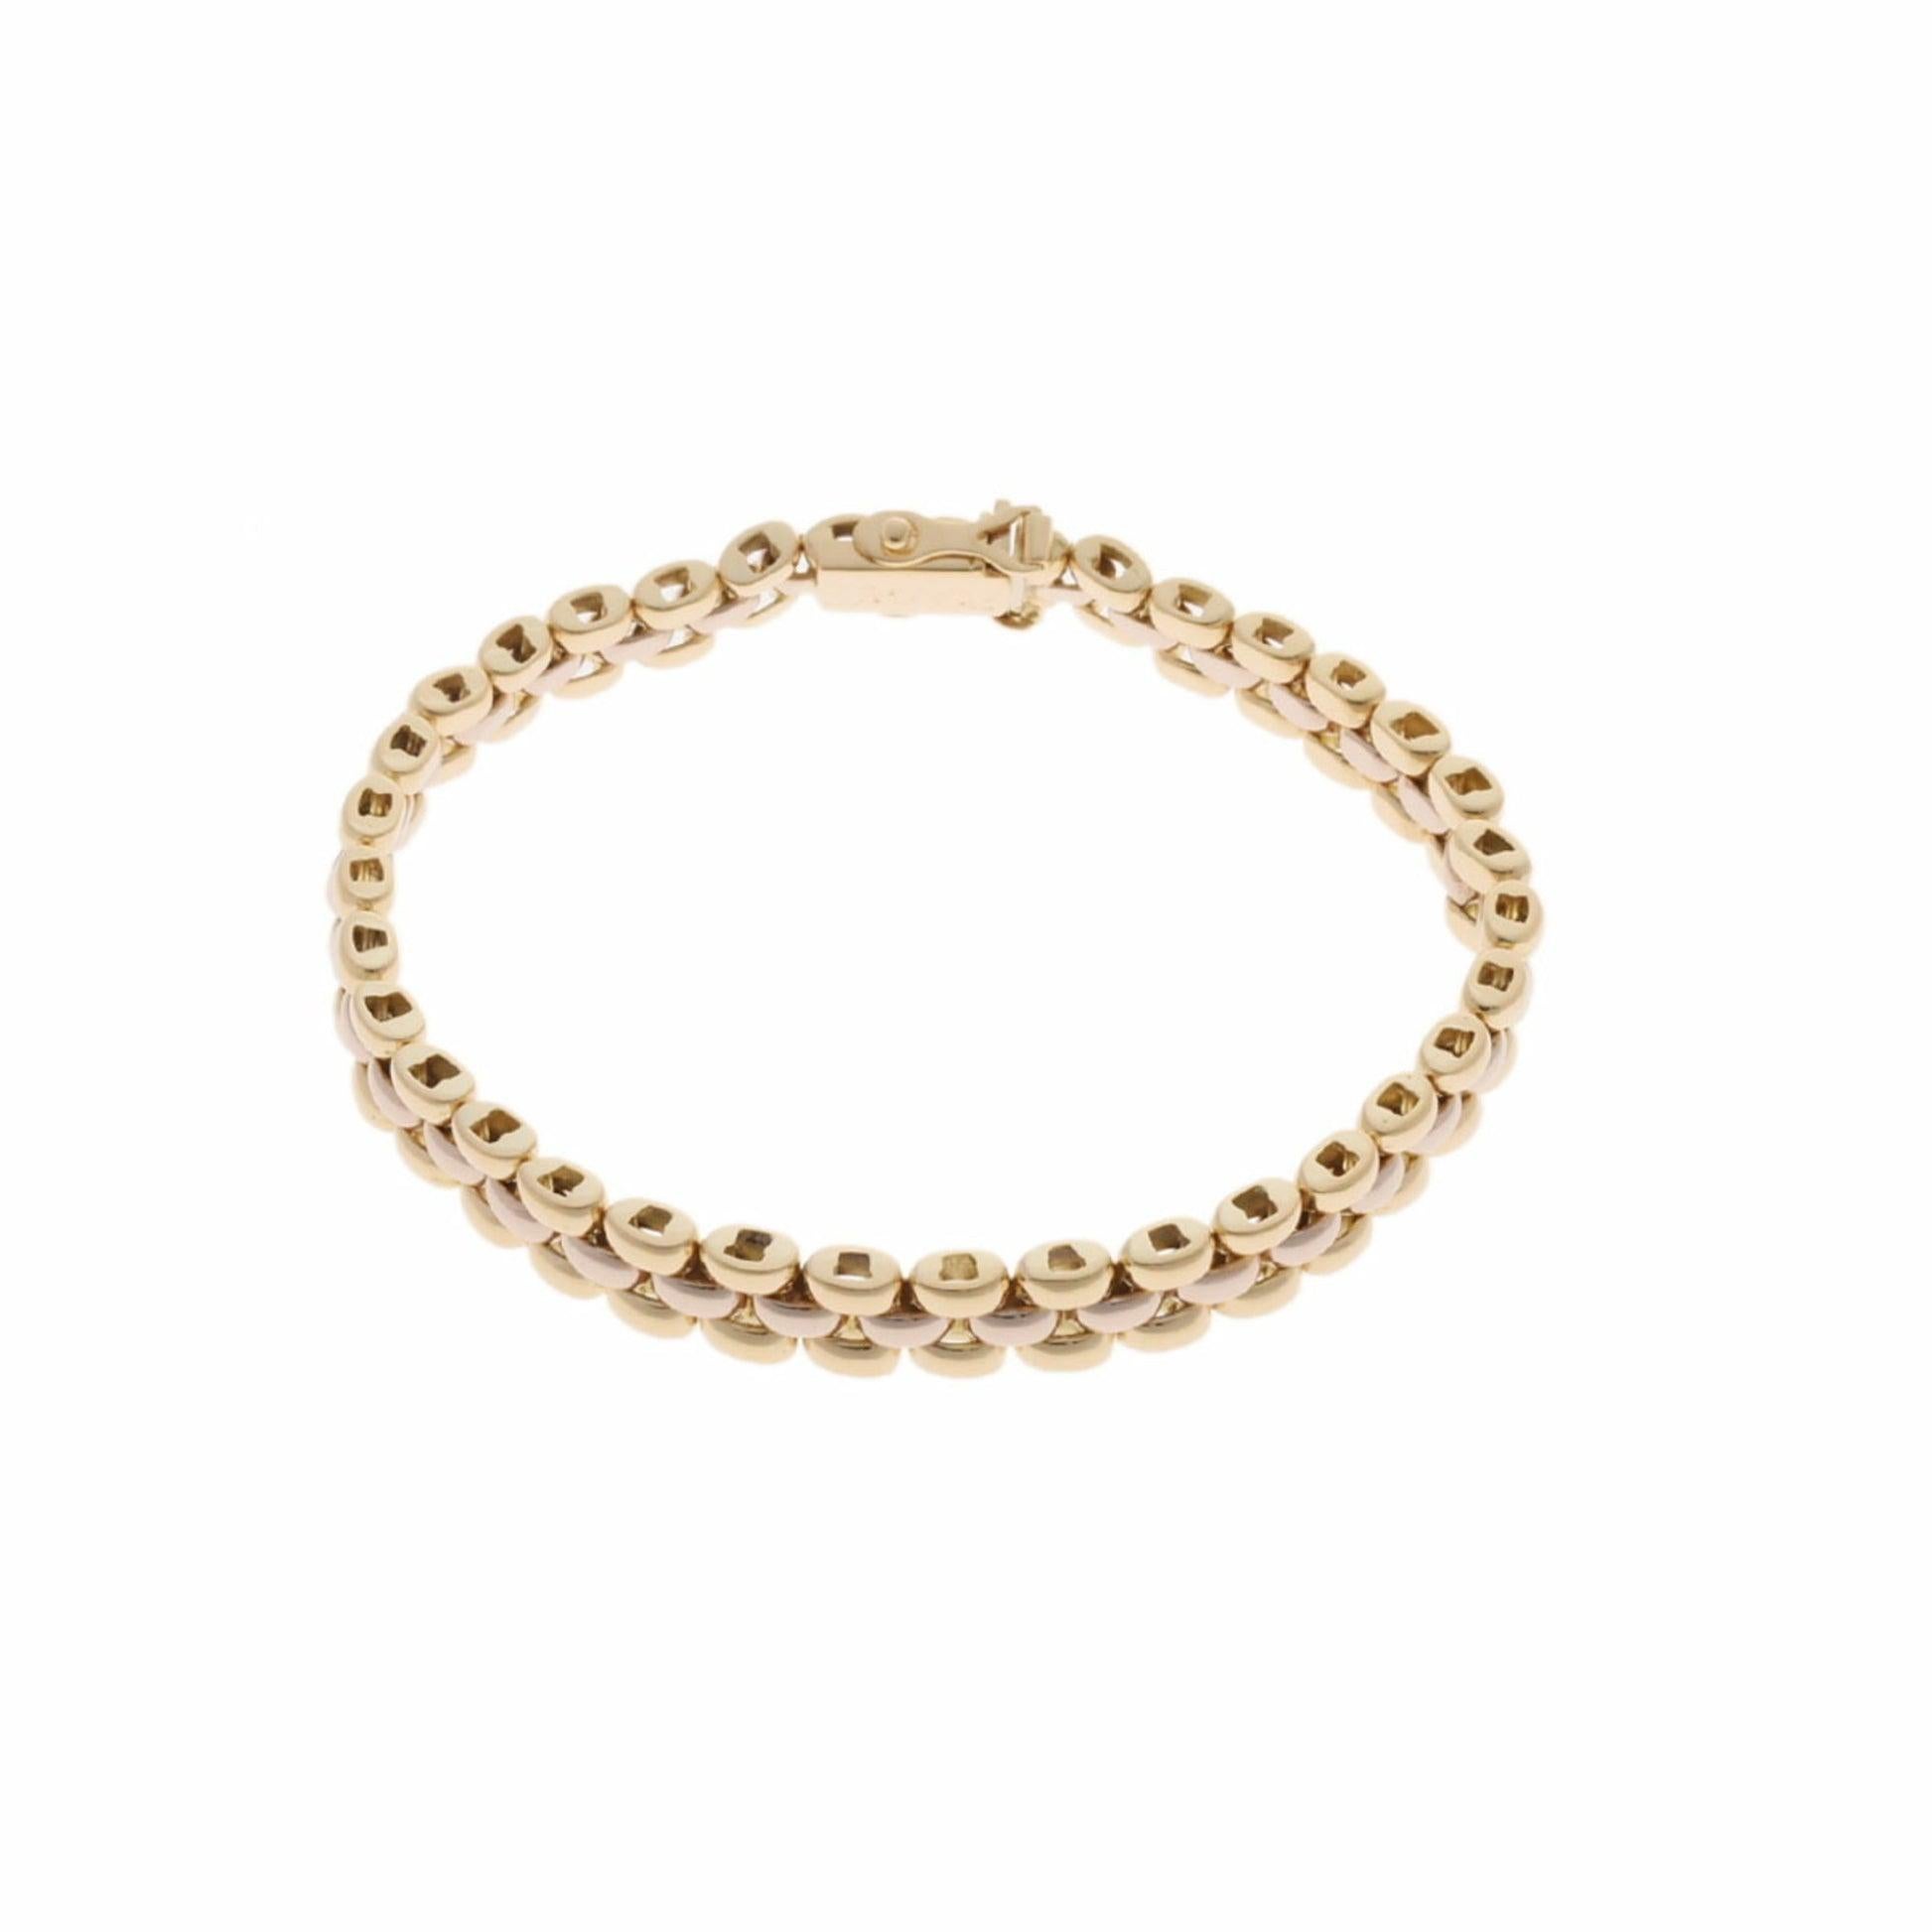 Piaget Bracelet in 18K Yellow Gold And White Gold

Additional Information:
Brand: Piaget
Gender: Women
Material: White gold (18K), Yellow gold (18K)
Condition details: This item has been used and may have some minor flaws. Before purchasing, please